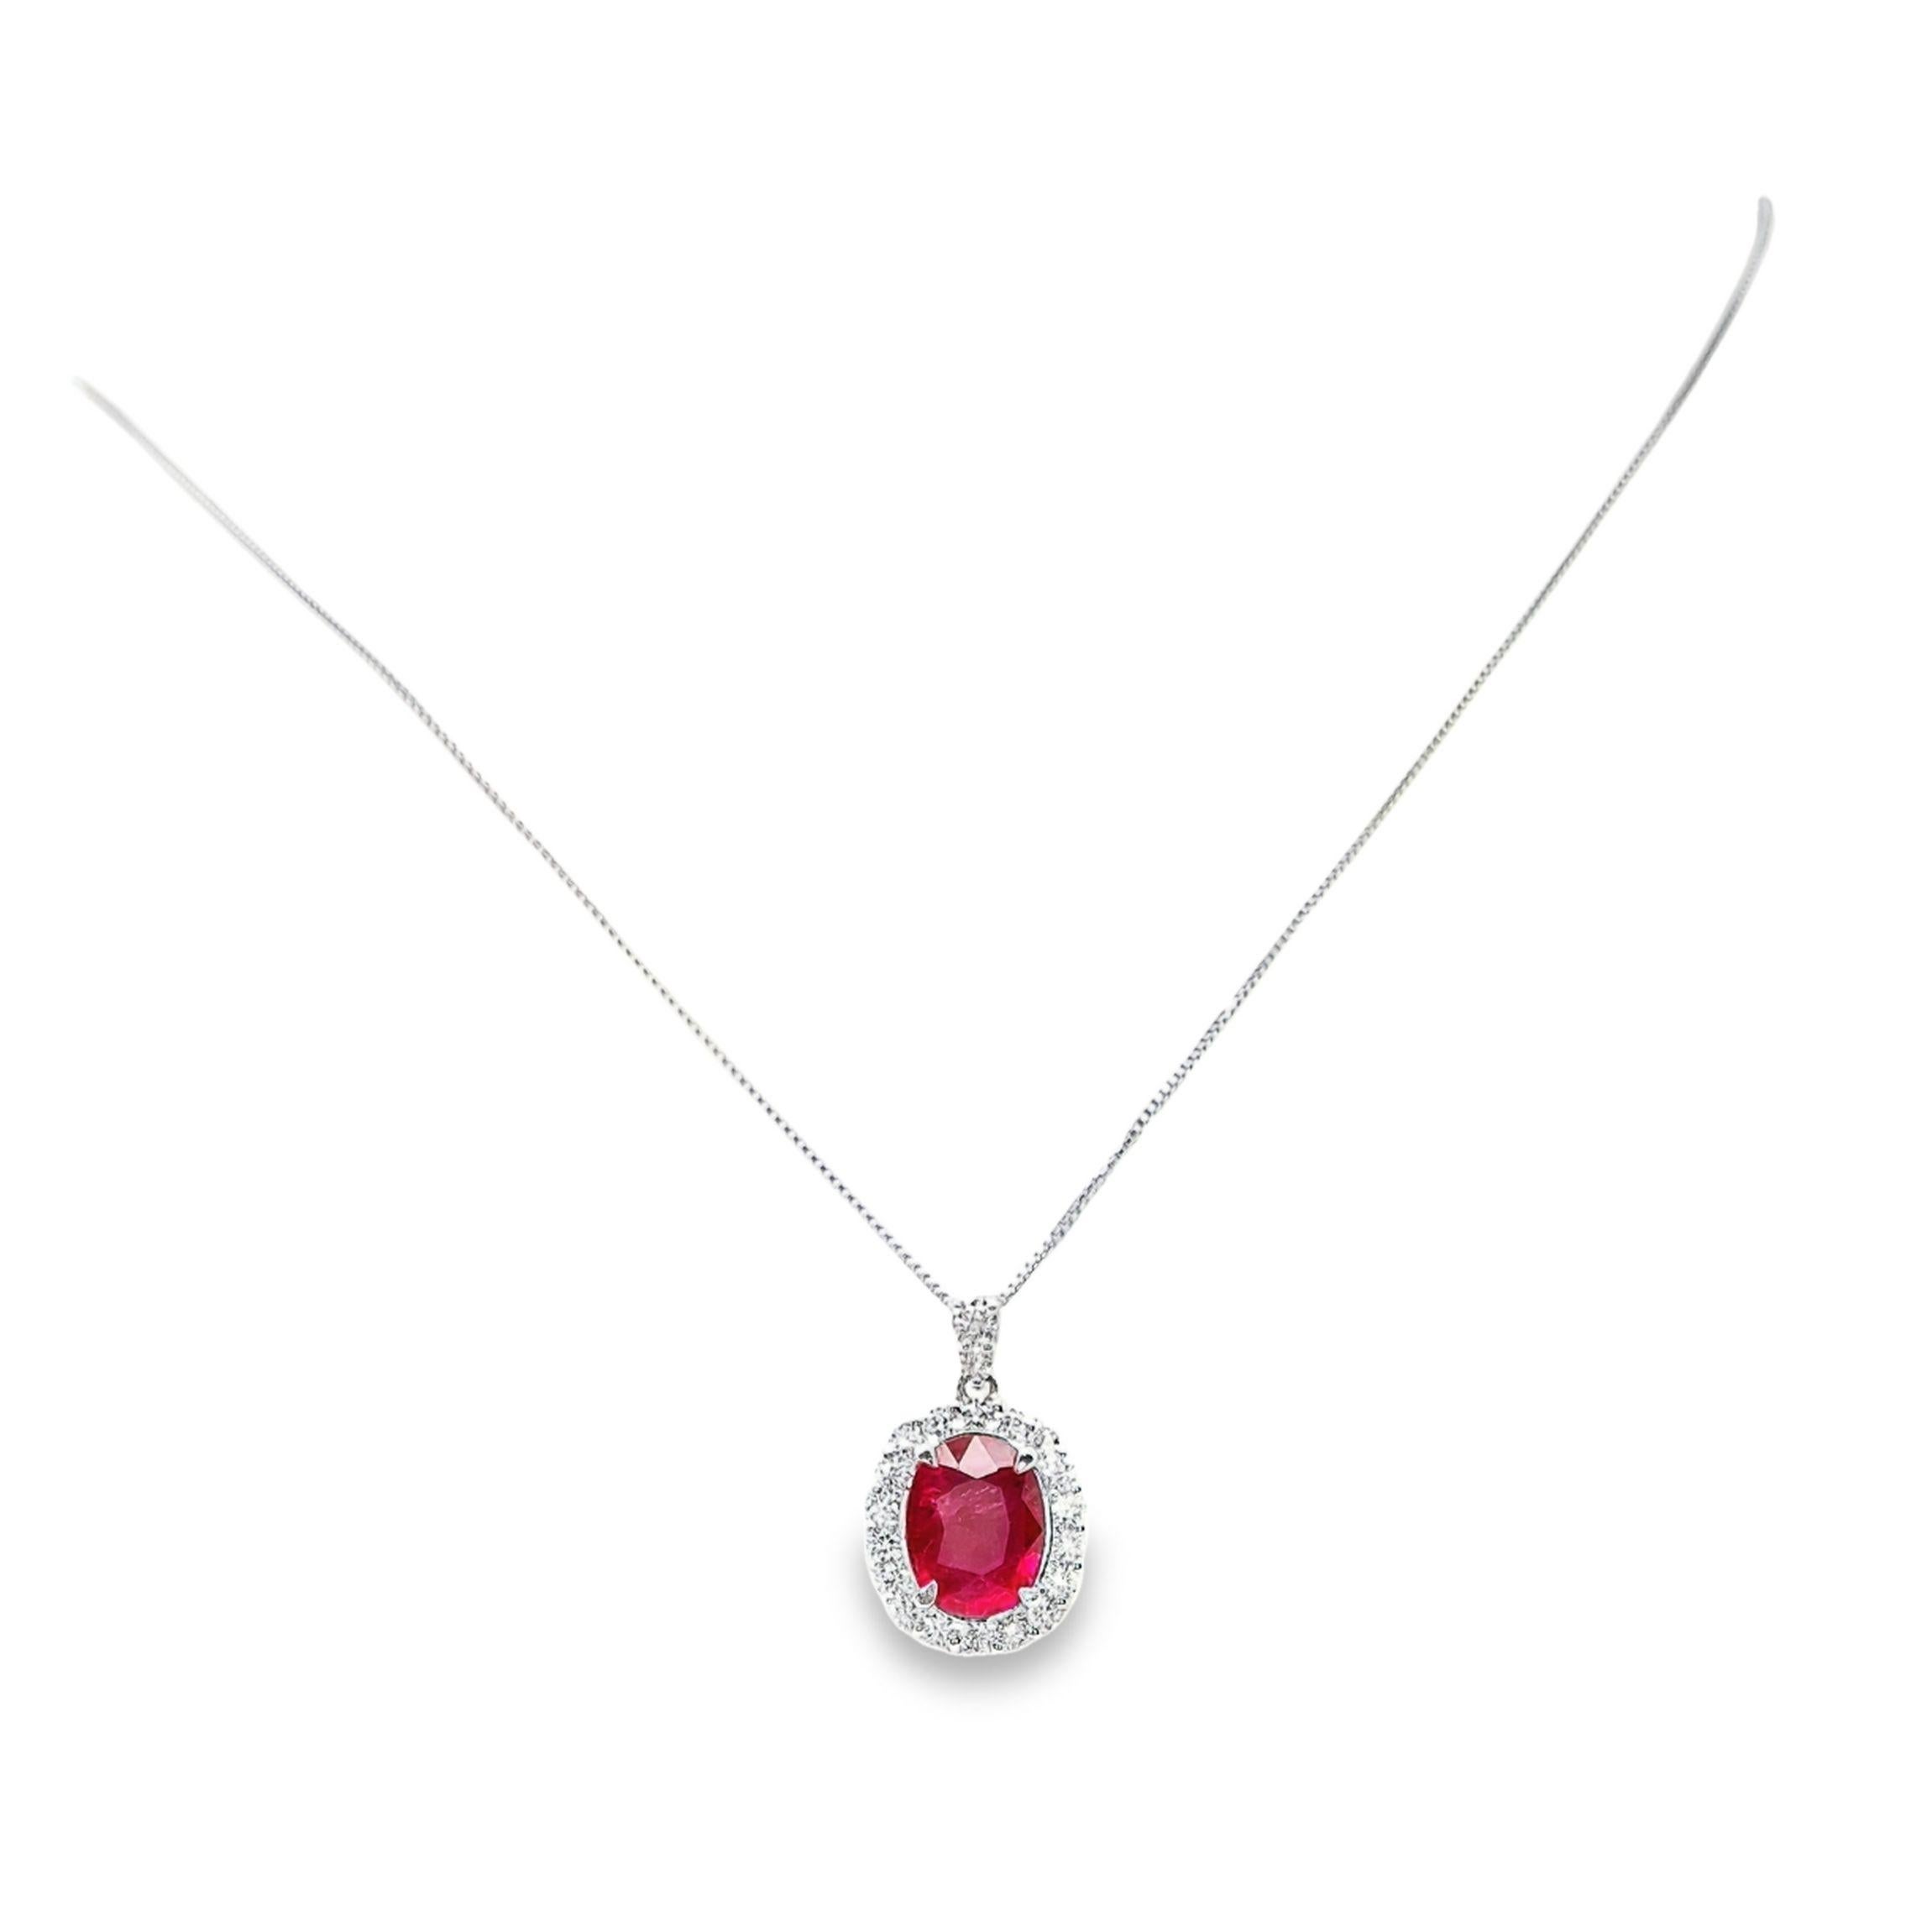 Oval Cut GIA Certified 1.98ct Natural Ruby Platinum Necklace